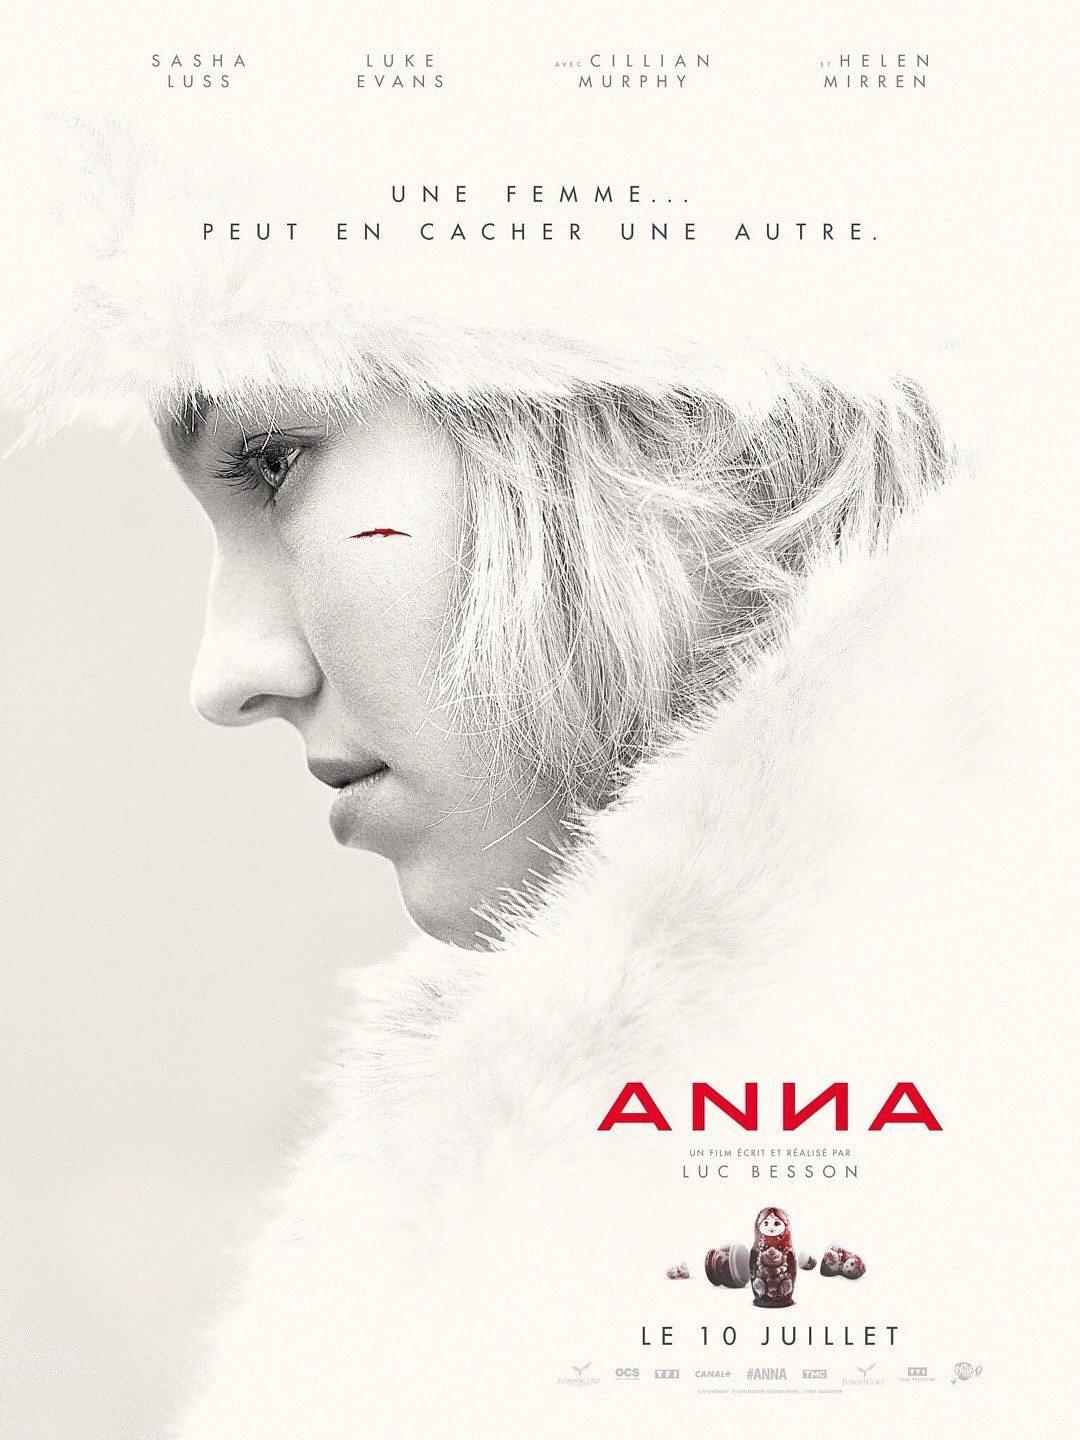  Anna.2019.720p.BluRay.x264-SPARKS 4.38GB-1.png